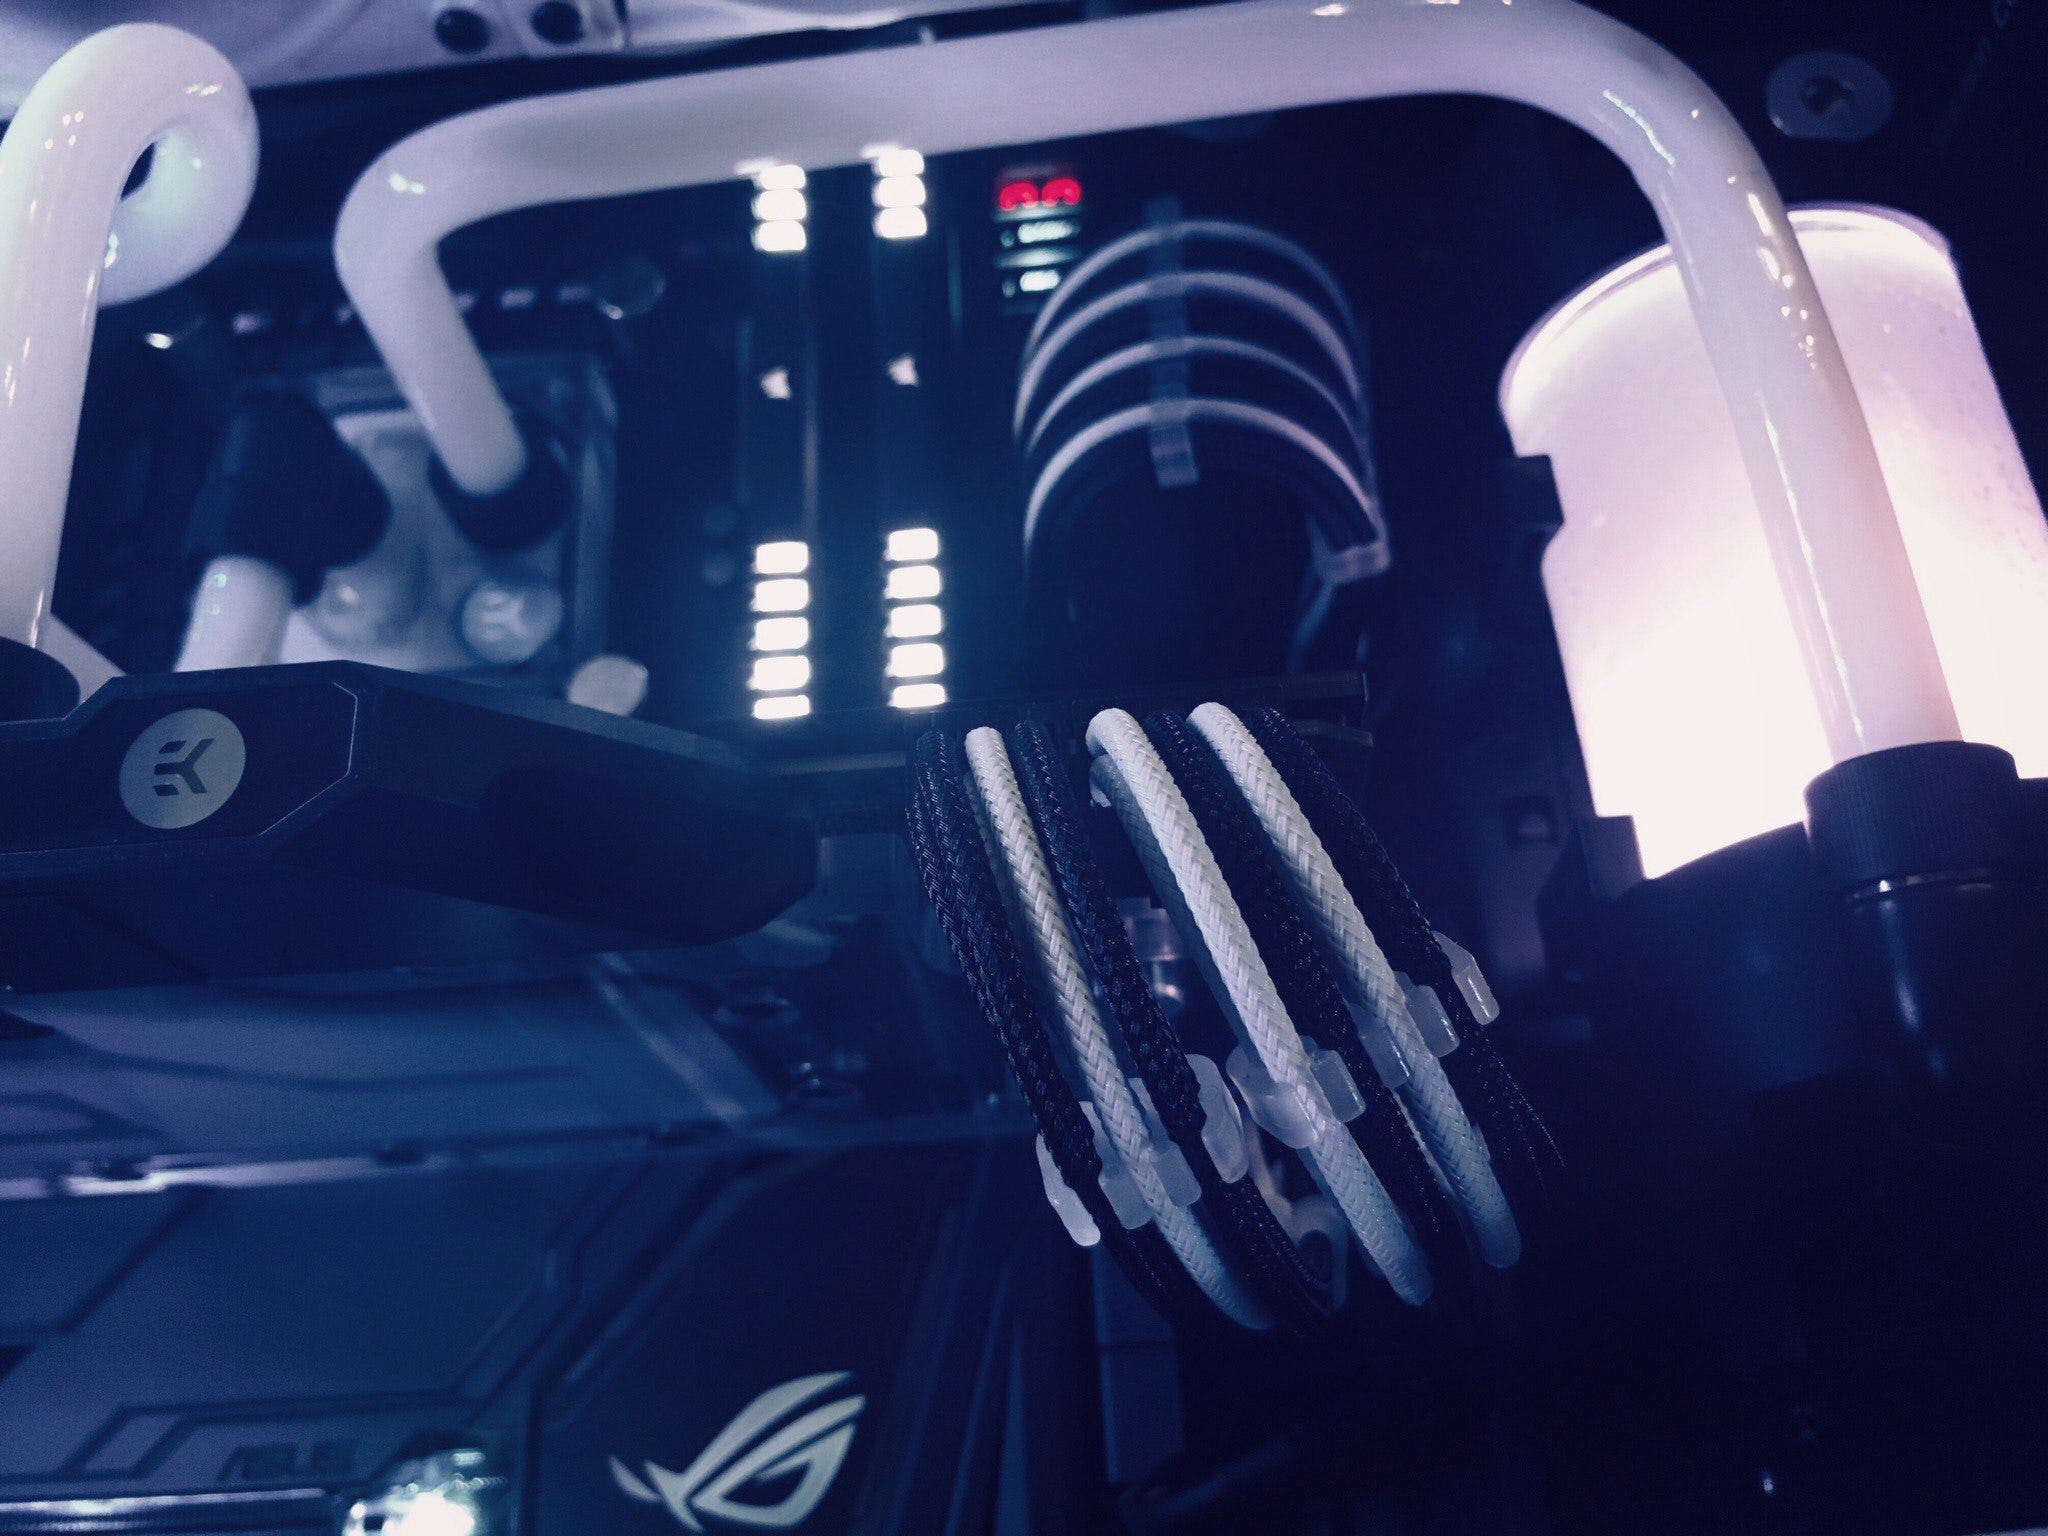 An ultimate beginners' guide to PC water cooling, by James Sunderland